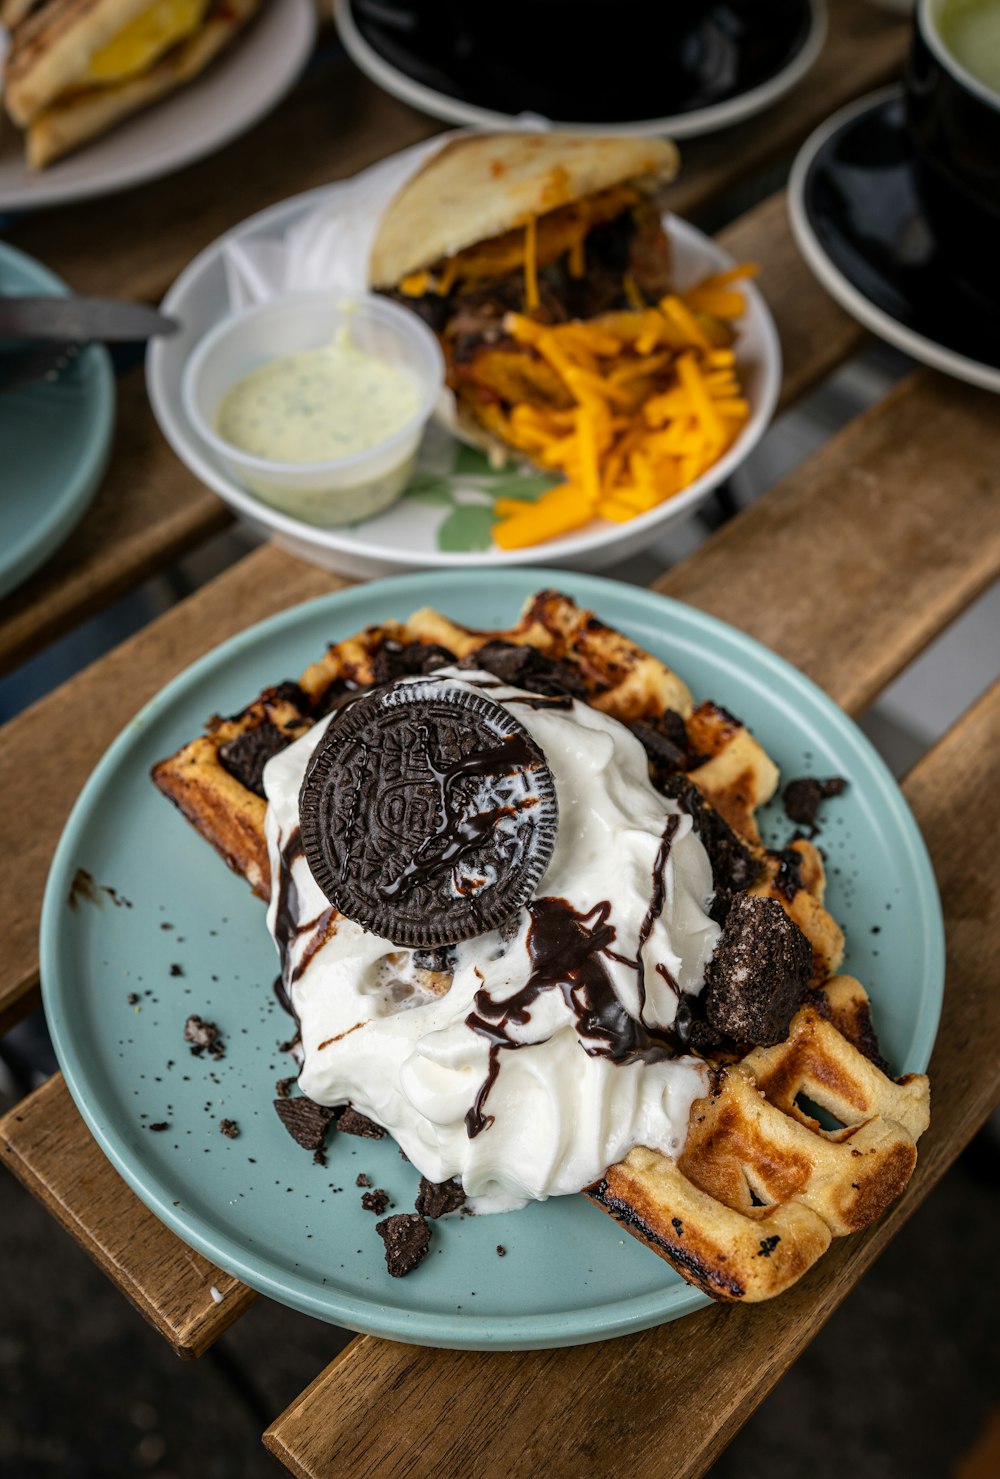 a plate of waffles and ice cream on a table